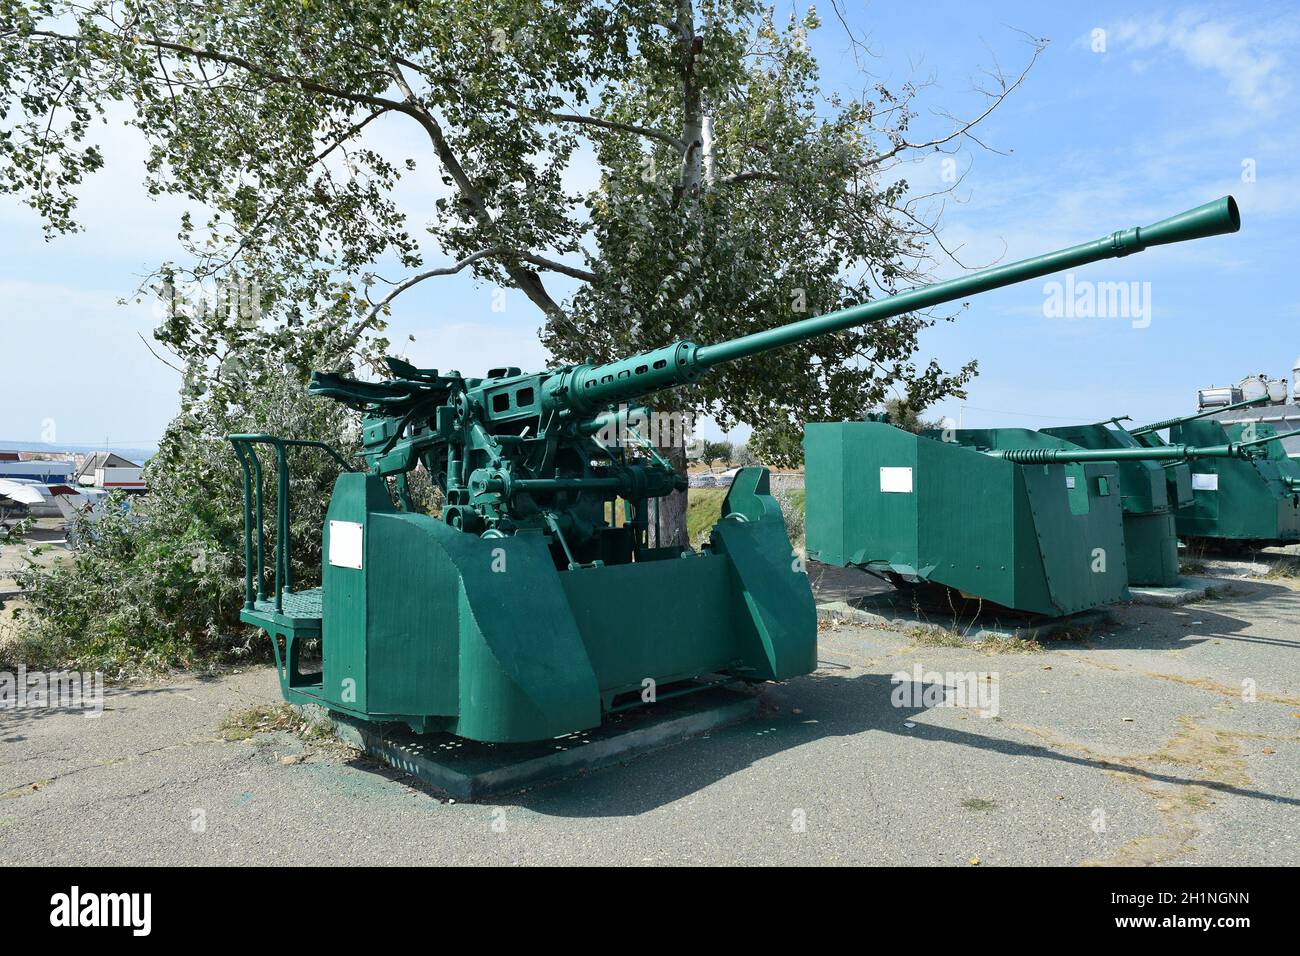 Temryuk, Russia - August 15, 2015: Anti-aircraft guns. Museum of weapons Open-air museum Stock Photo